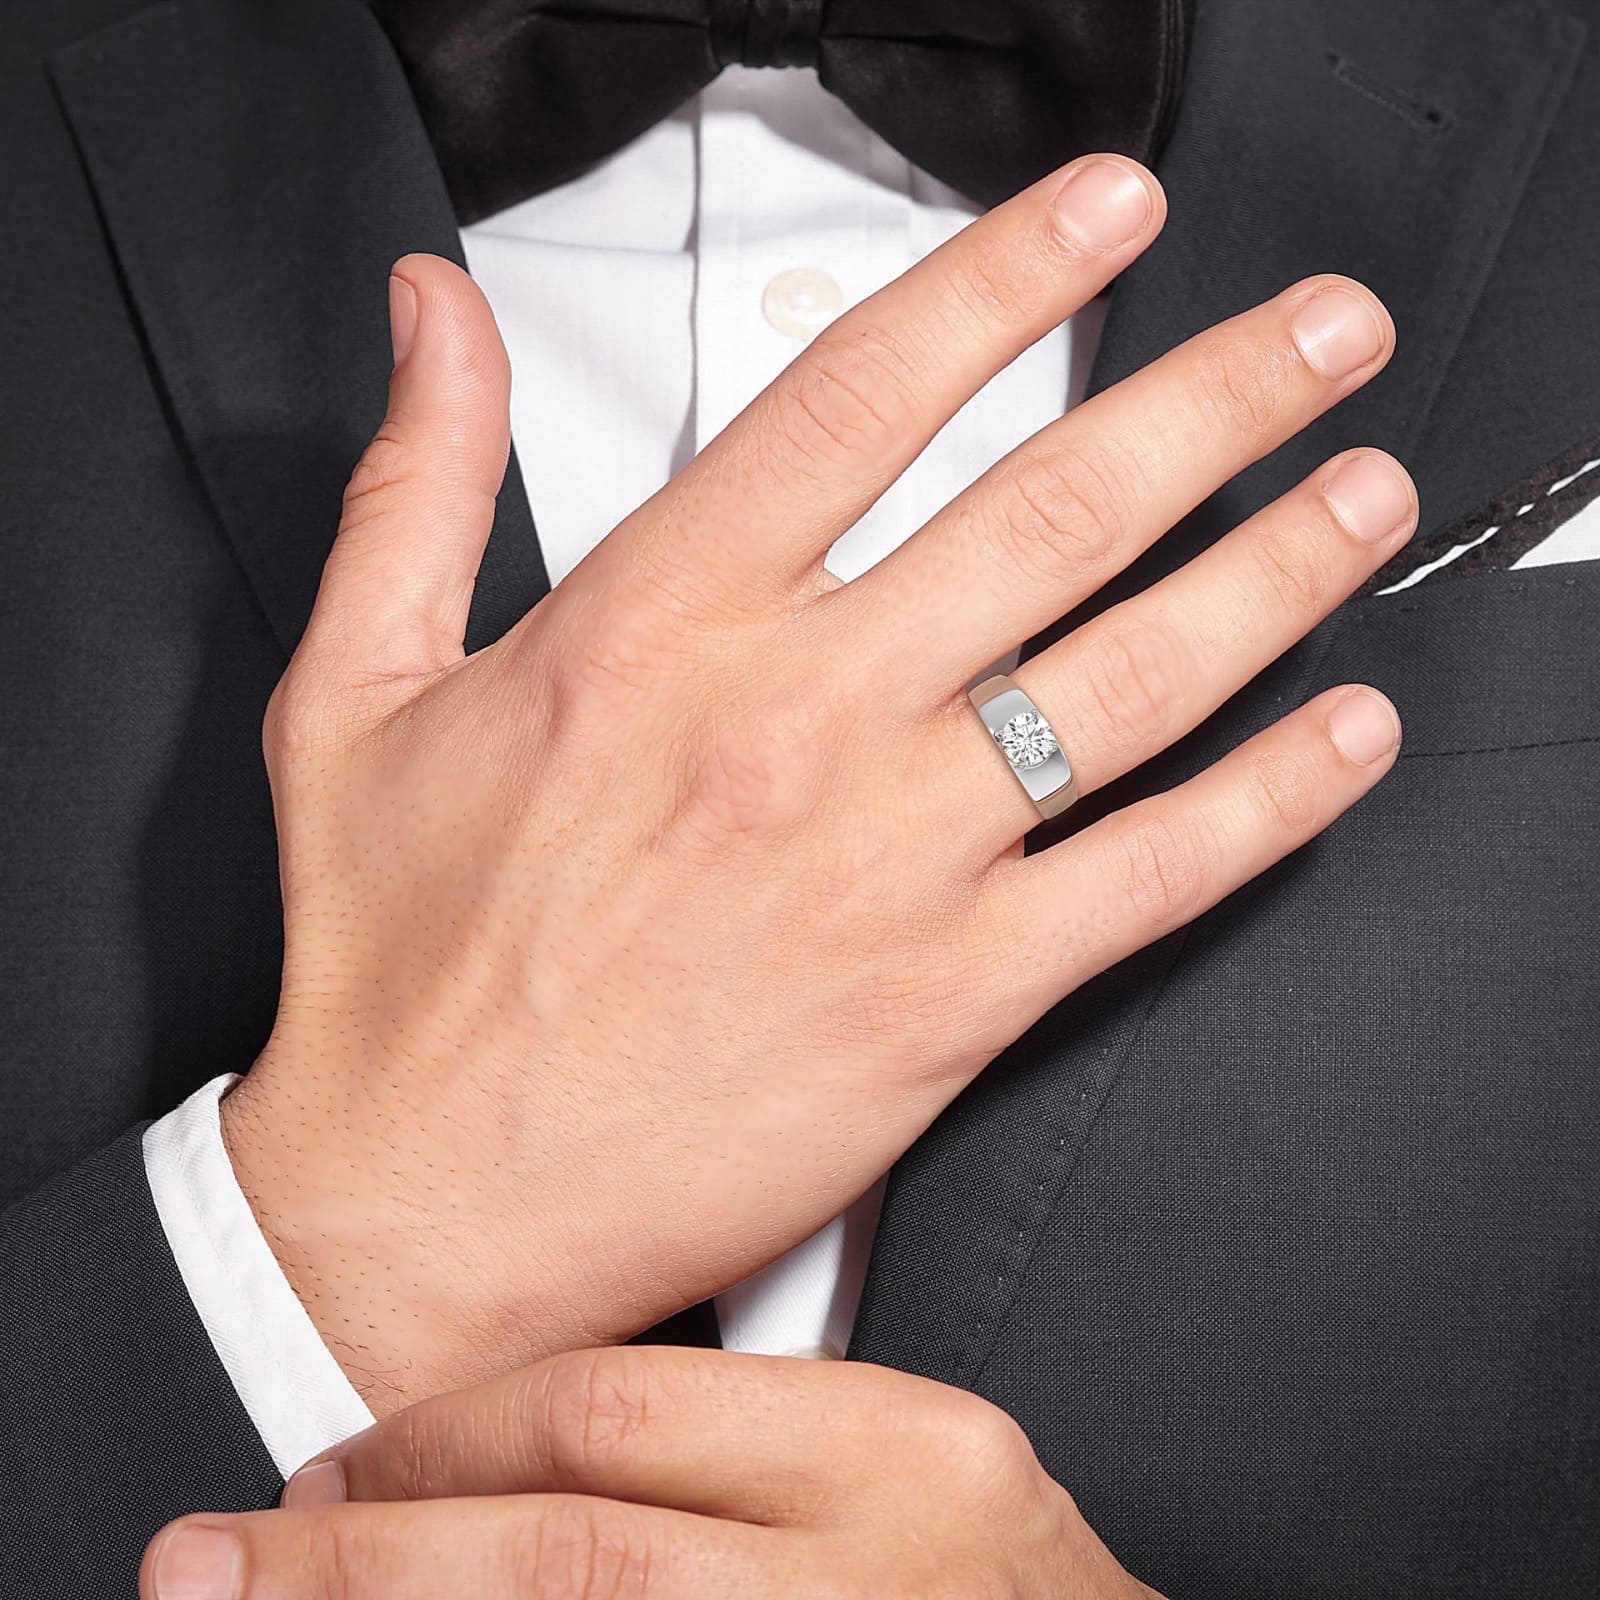 2-Carat MYZA Sterling Silver Ring - MYZA, a sophisticated men's handwear choice for refined style